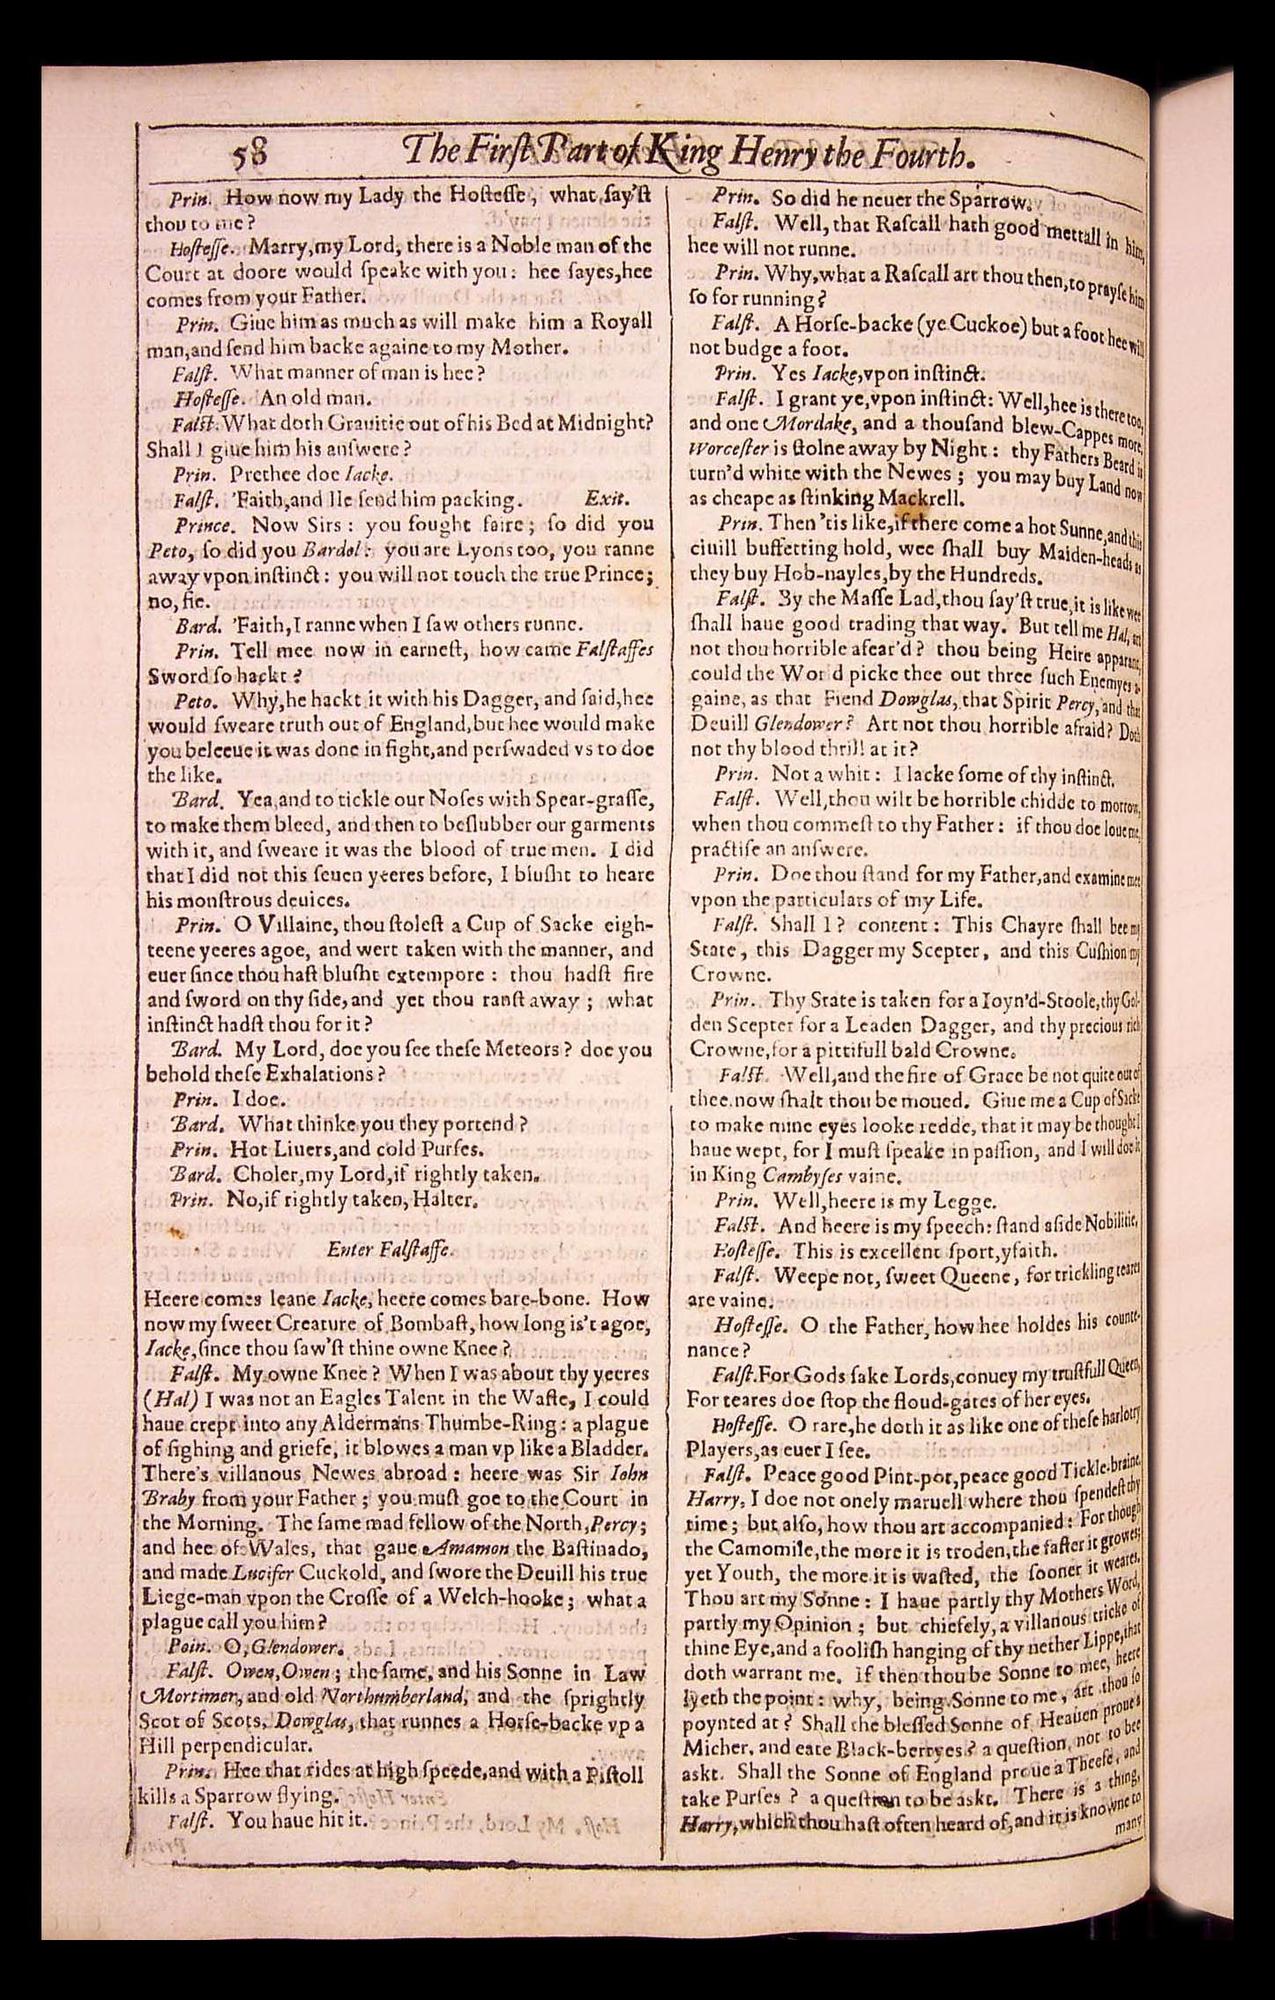 Image of page 378